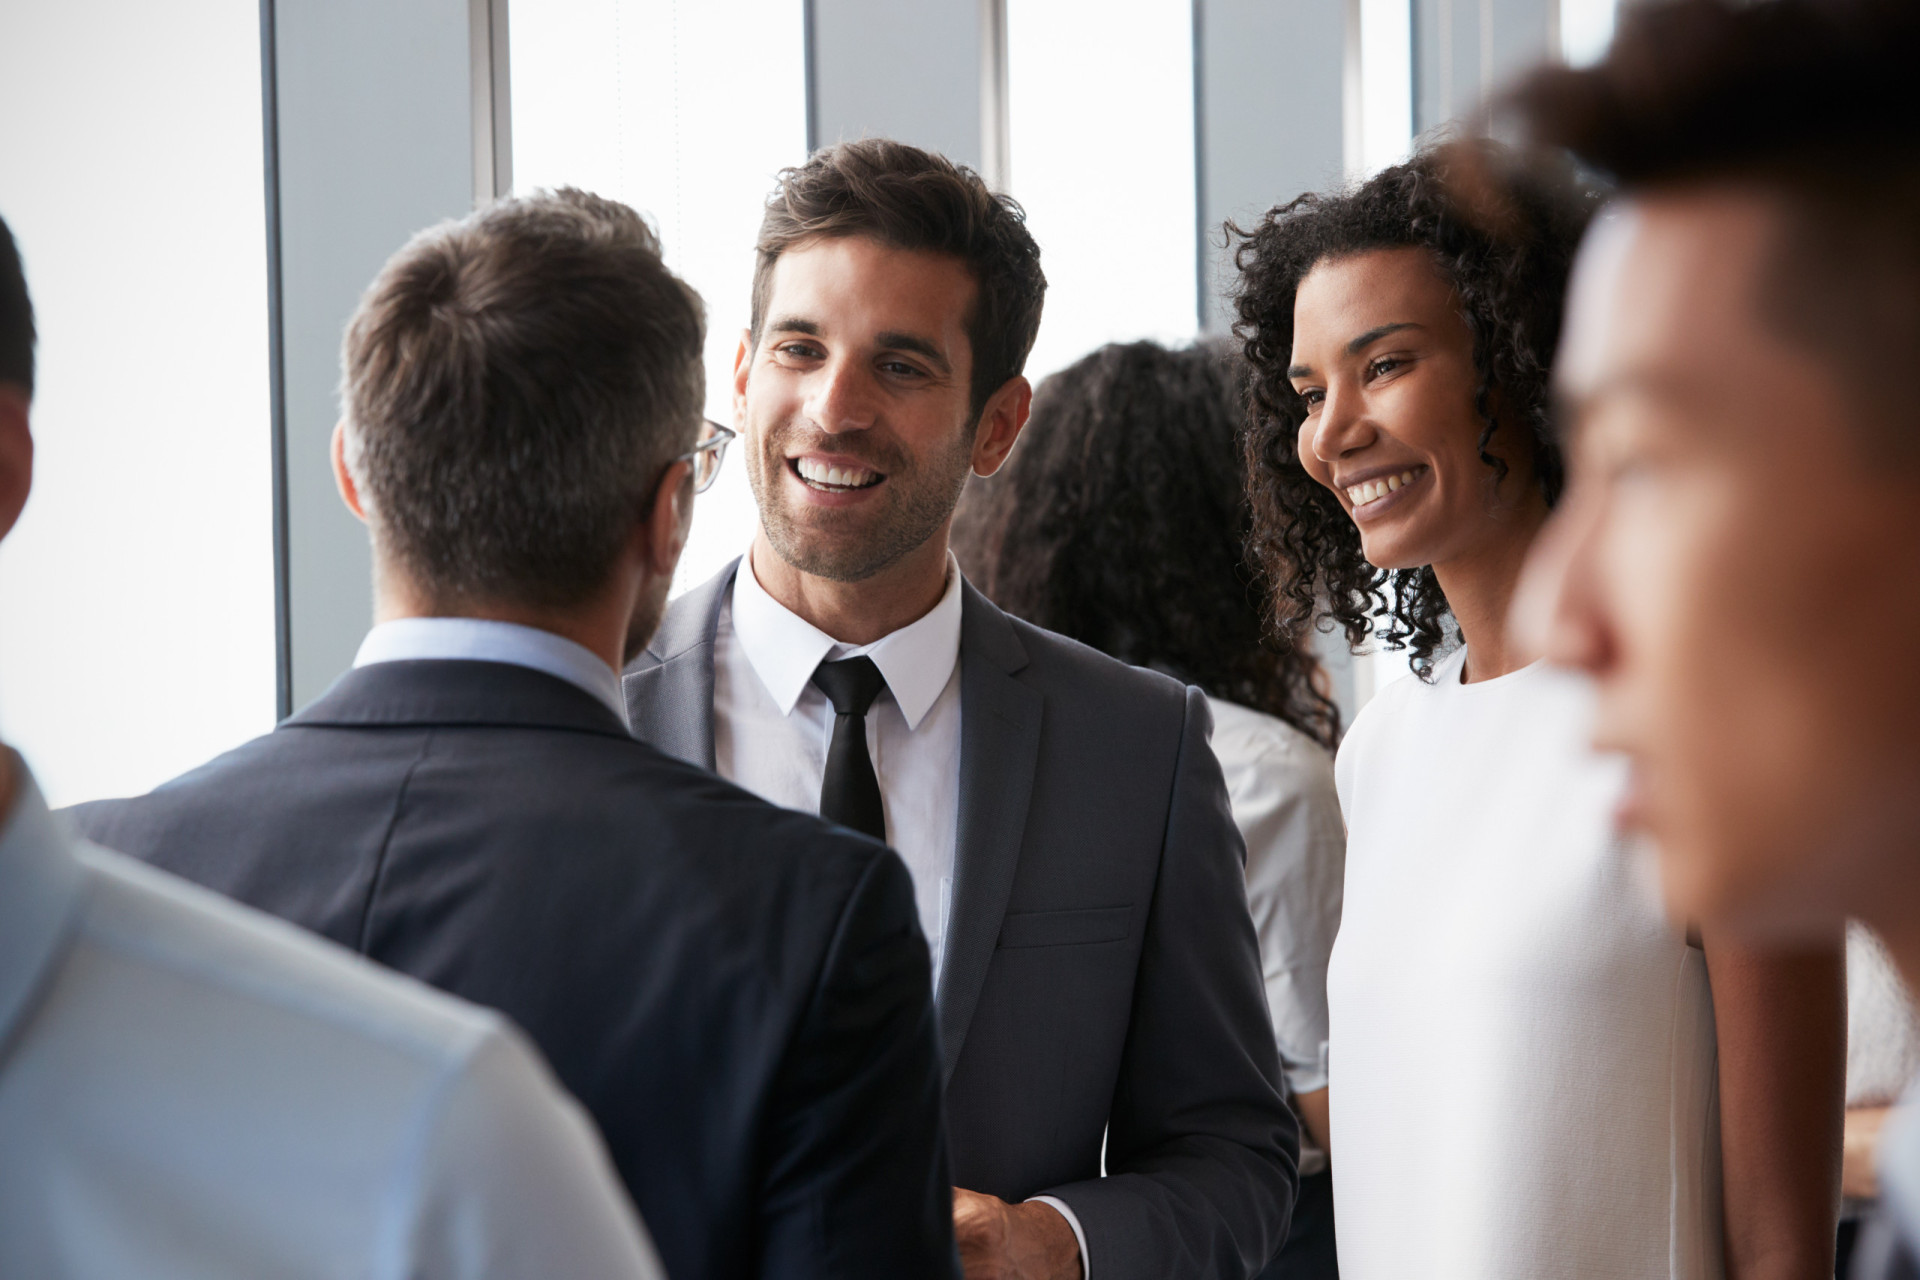 <p><span>When it comes to networking, it's worth honing this skill both inside and outside your current organization. You never know when knowing someone might come in handy.</span></p><p><a href="https://www.msn.com/en-us/community/channel/vid-7xx8mnucu55yw63we9va2gwr7uihbxwc68fxqp25x6tg4ftibpra?cvid=94631541bc0f4f89bfd59158d696ad7e">Follow us and access great exclusive content every day</a></p>